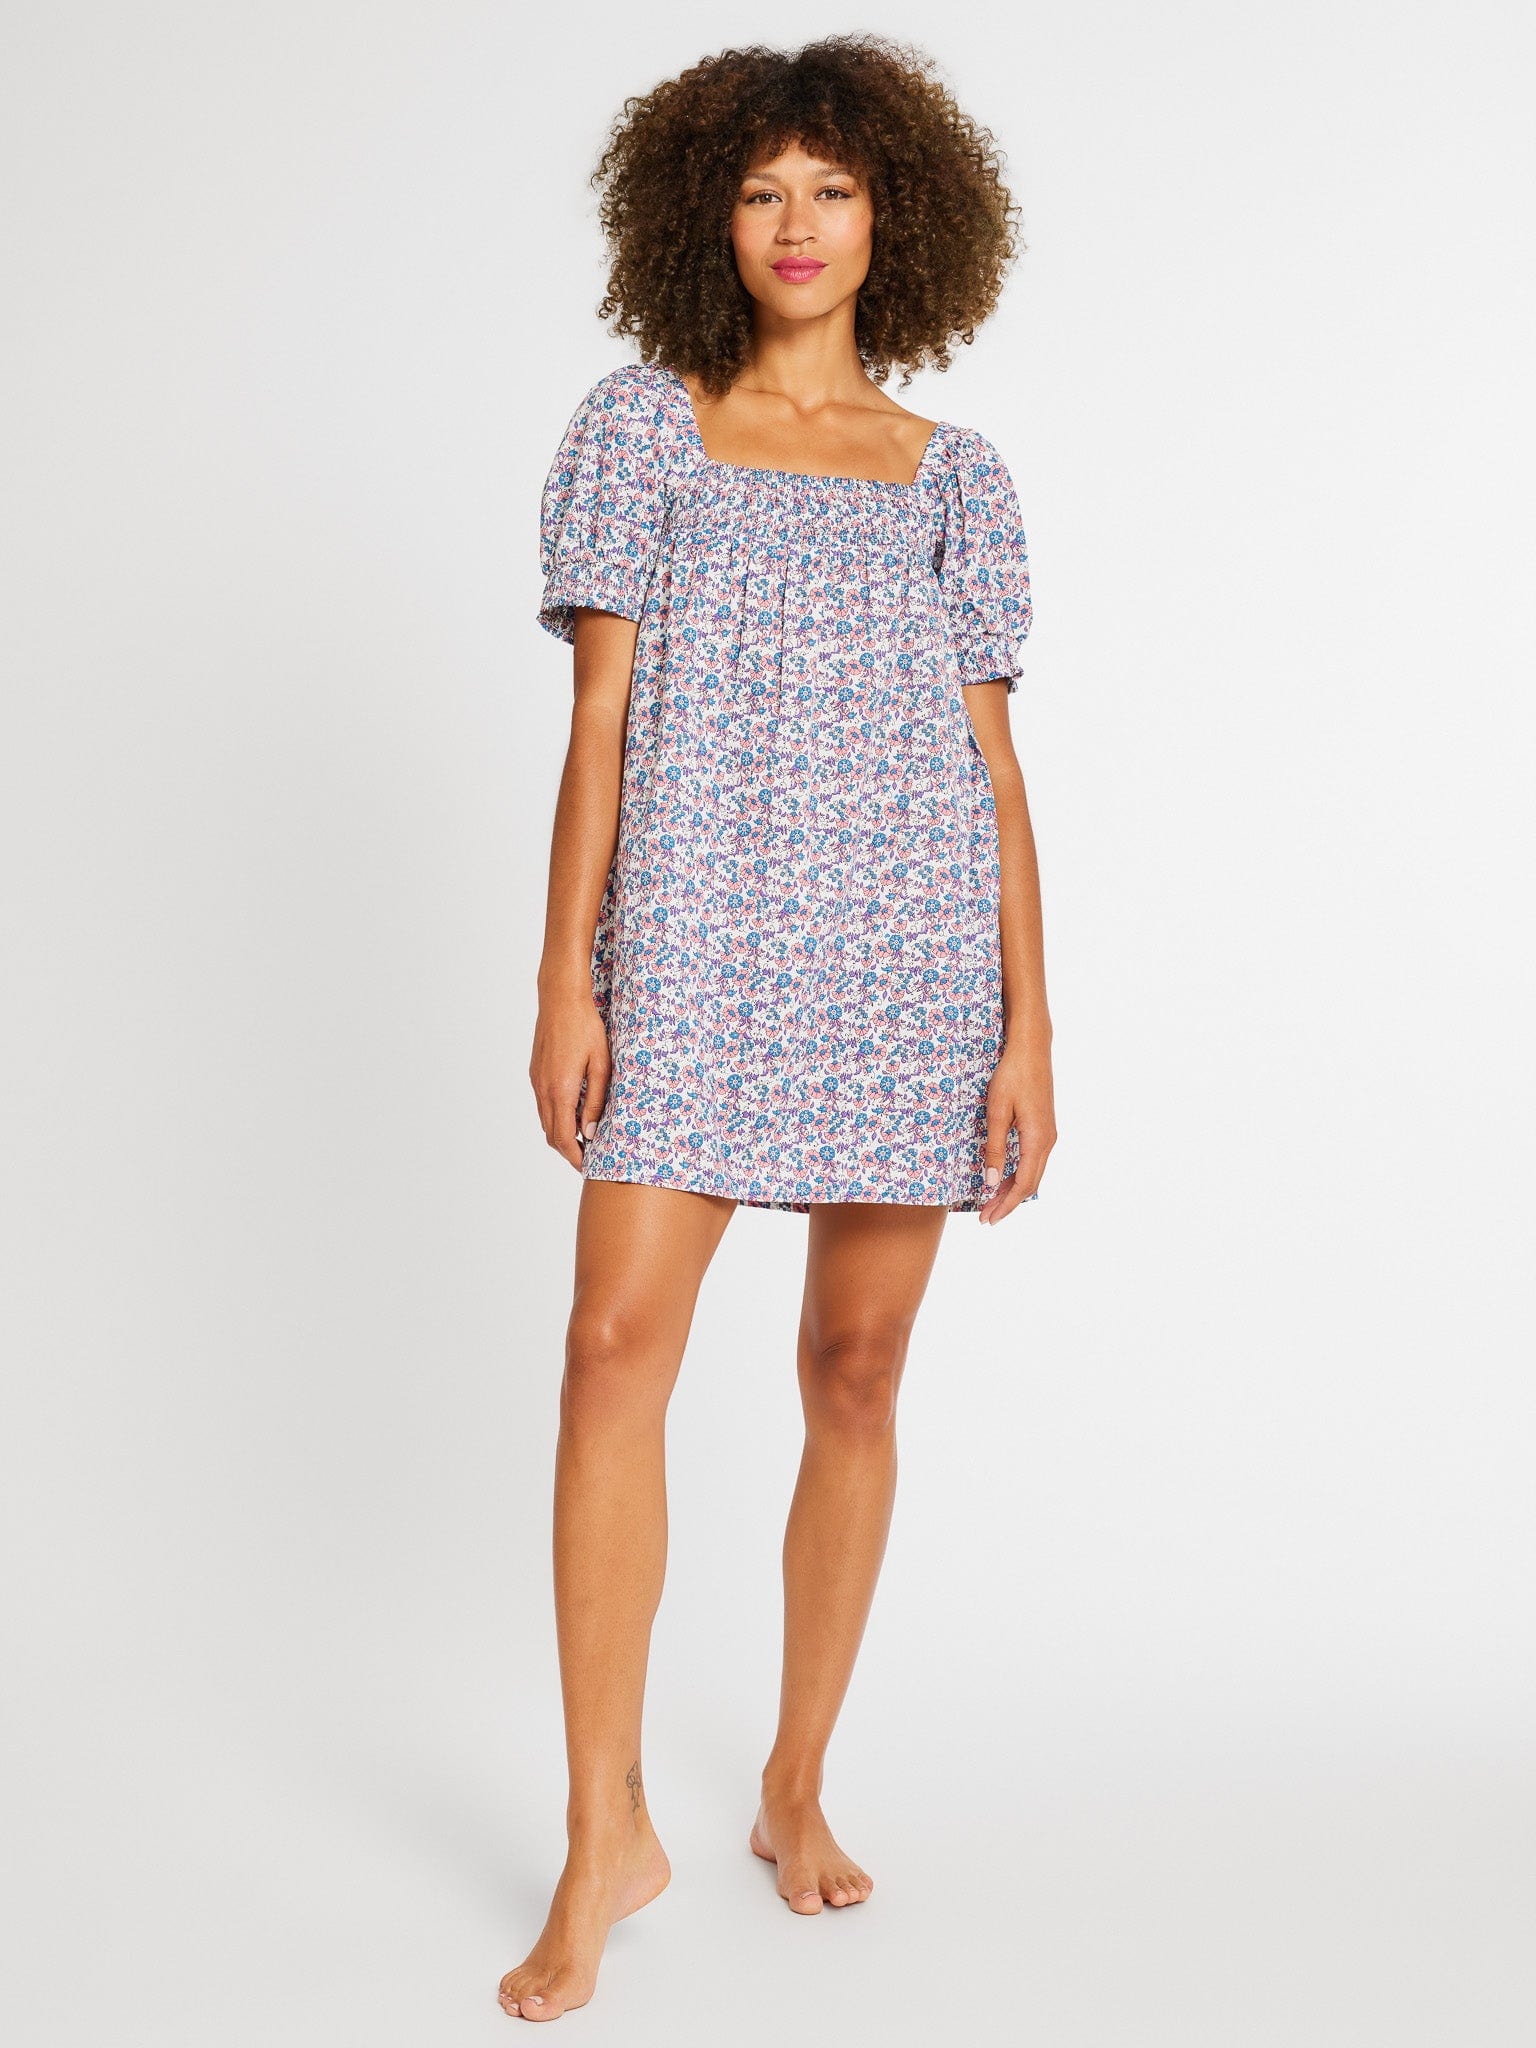 MILLE Clothing Jane Dress in Bluebell